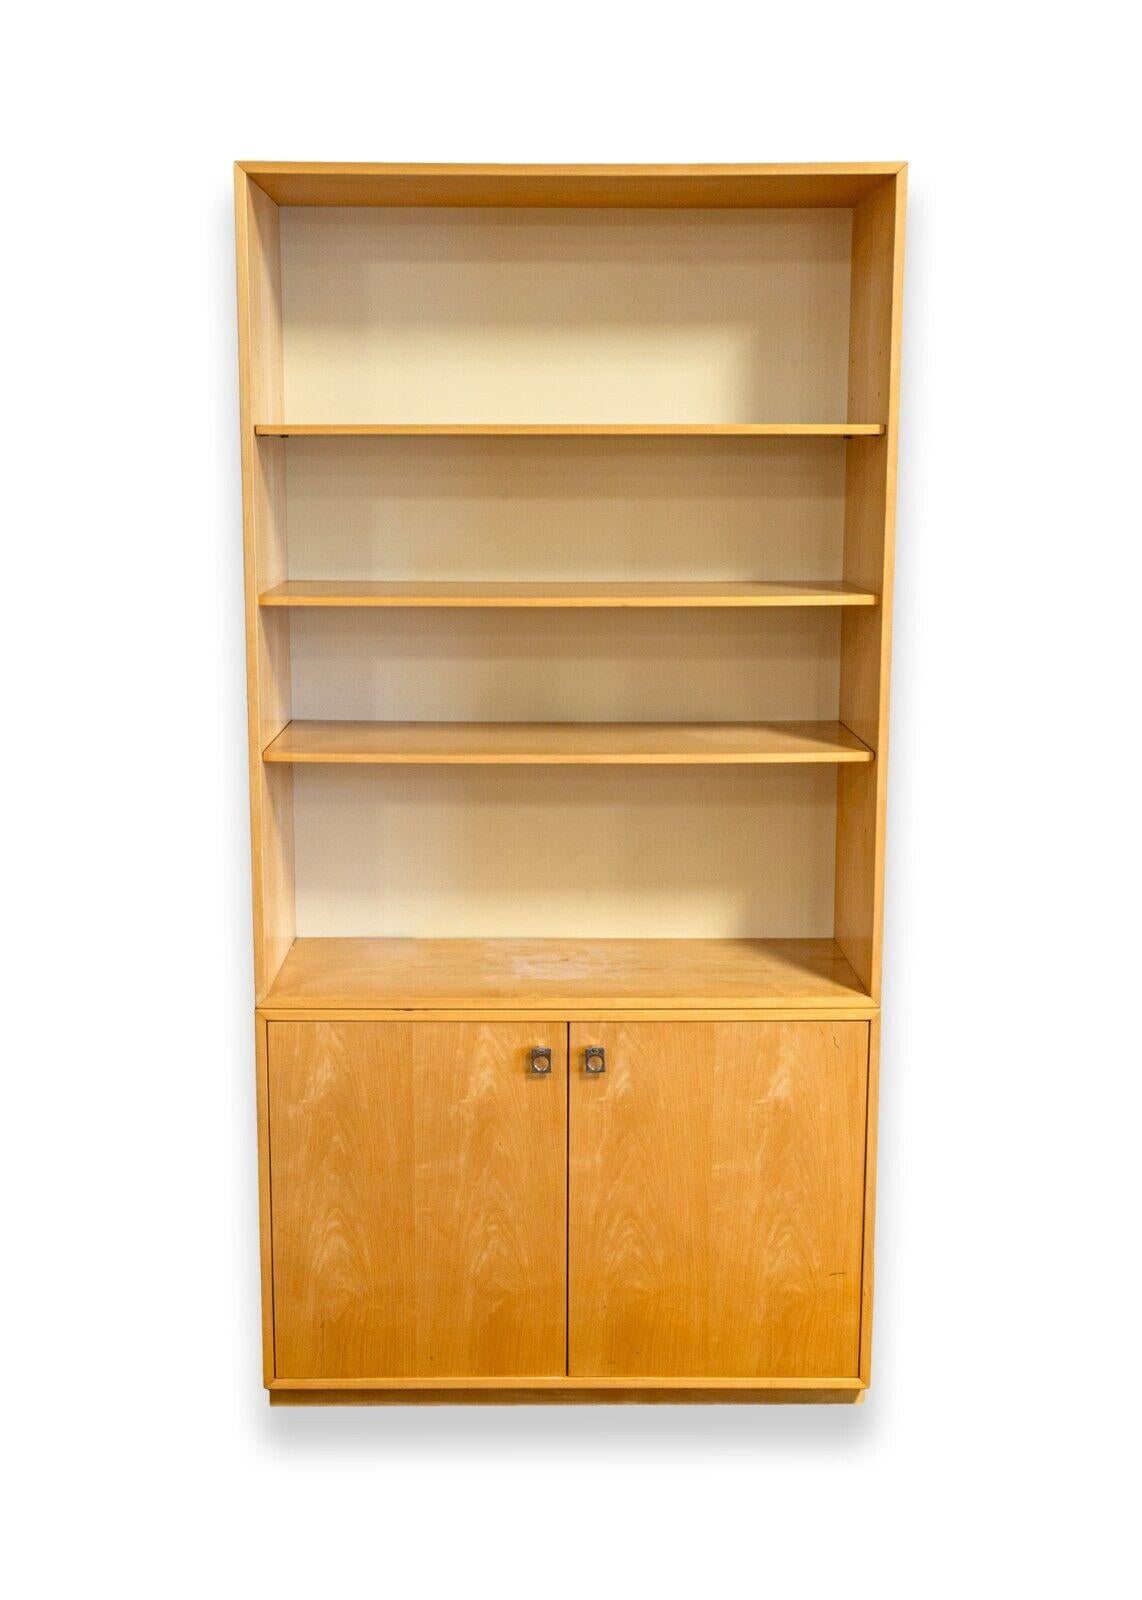 A pair of Founders free standing vintage wood bookshelf. A very sleek bookshelf shelving unit featuring a blonde wood construction with white panel backing. This piece features a free standing design, 4 open shelves, and 2 lower cupboard doors